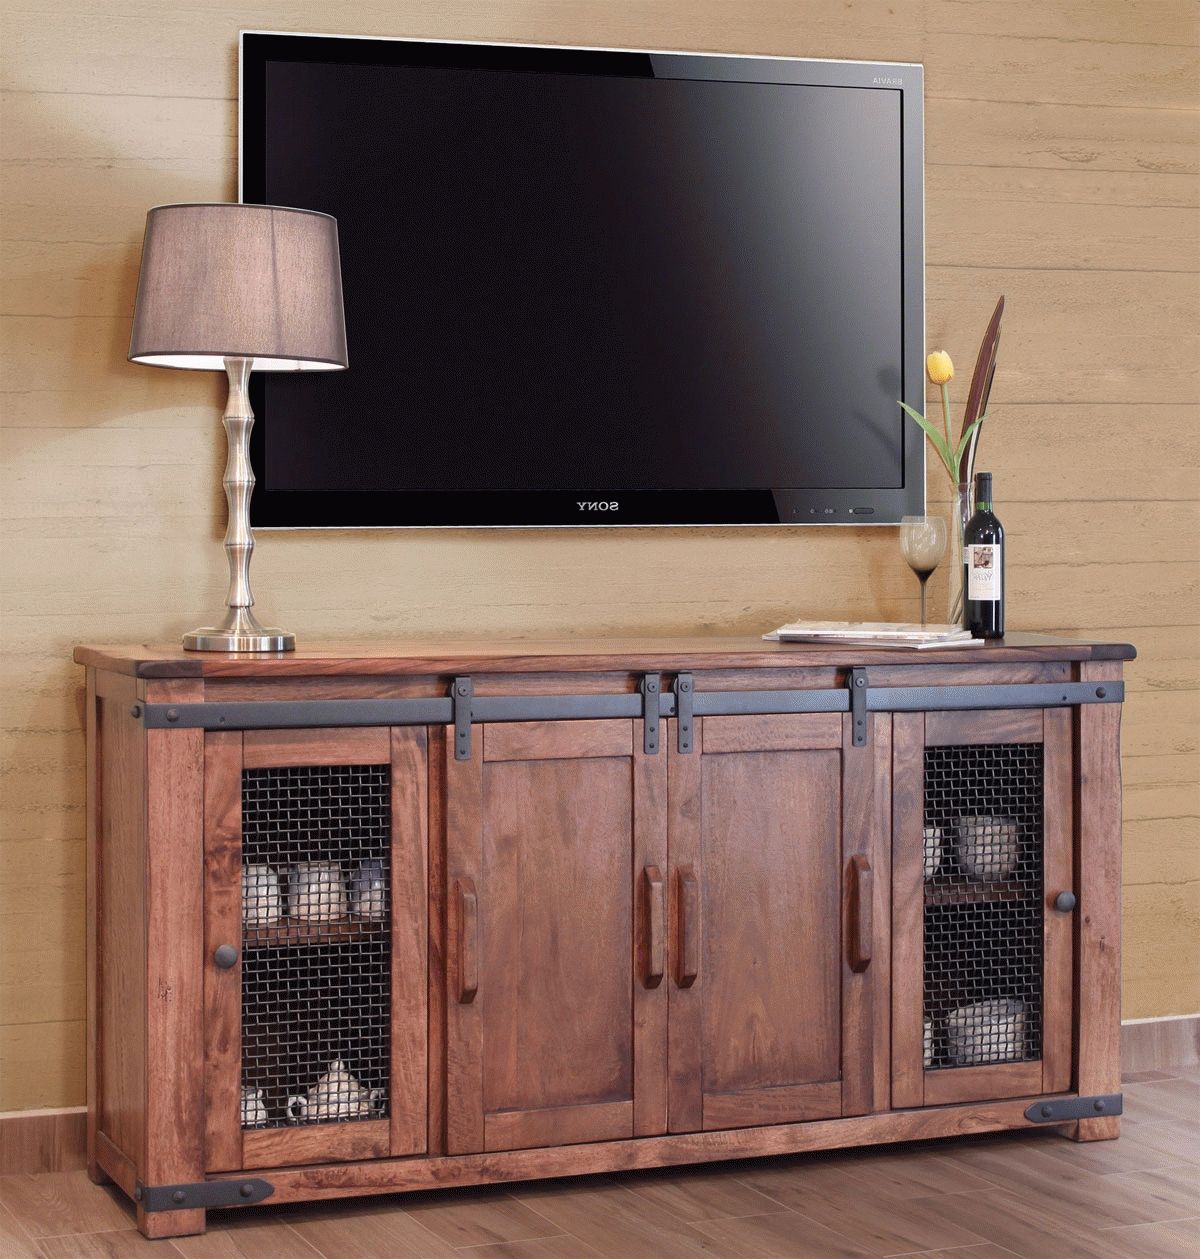 Barn Door Tv Stand, Rustic Barn Door Tv Stand, Rustic Tv Stand Regarding Rustic Furniture Tv Stands (View 16 of 20)